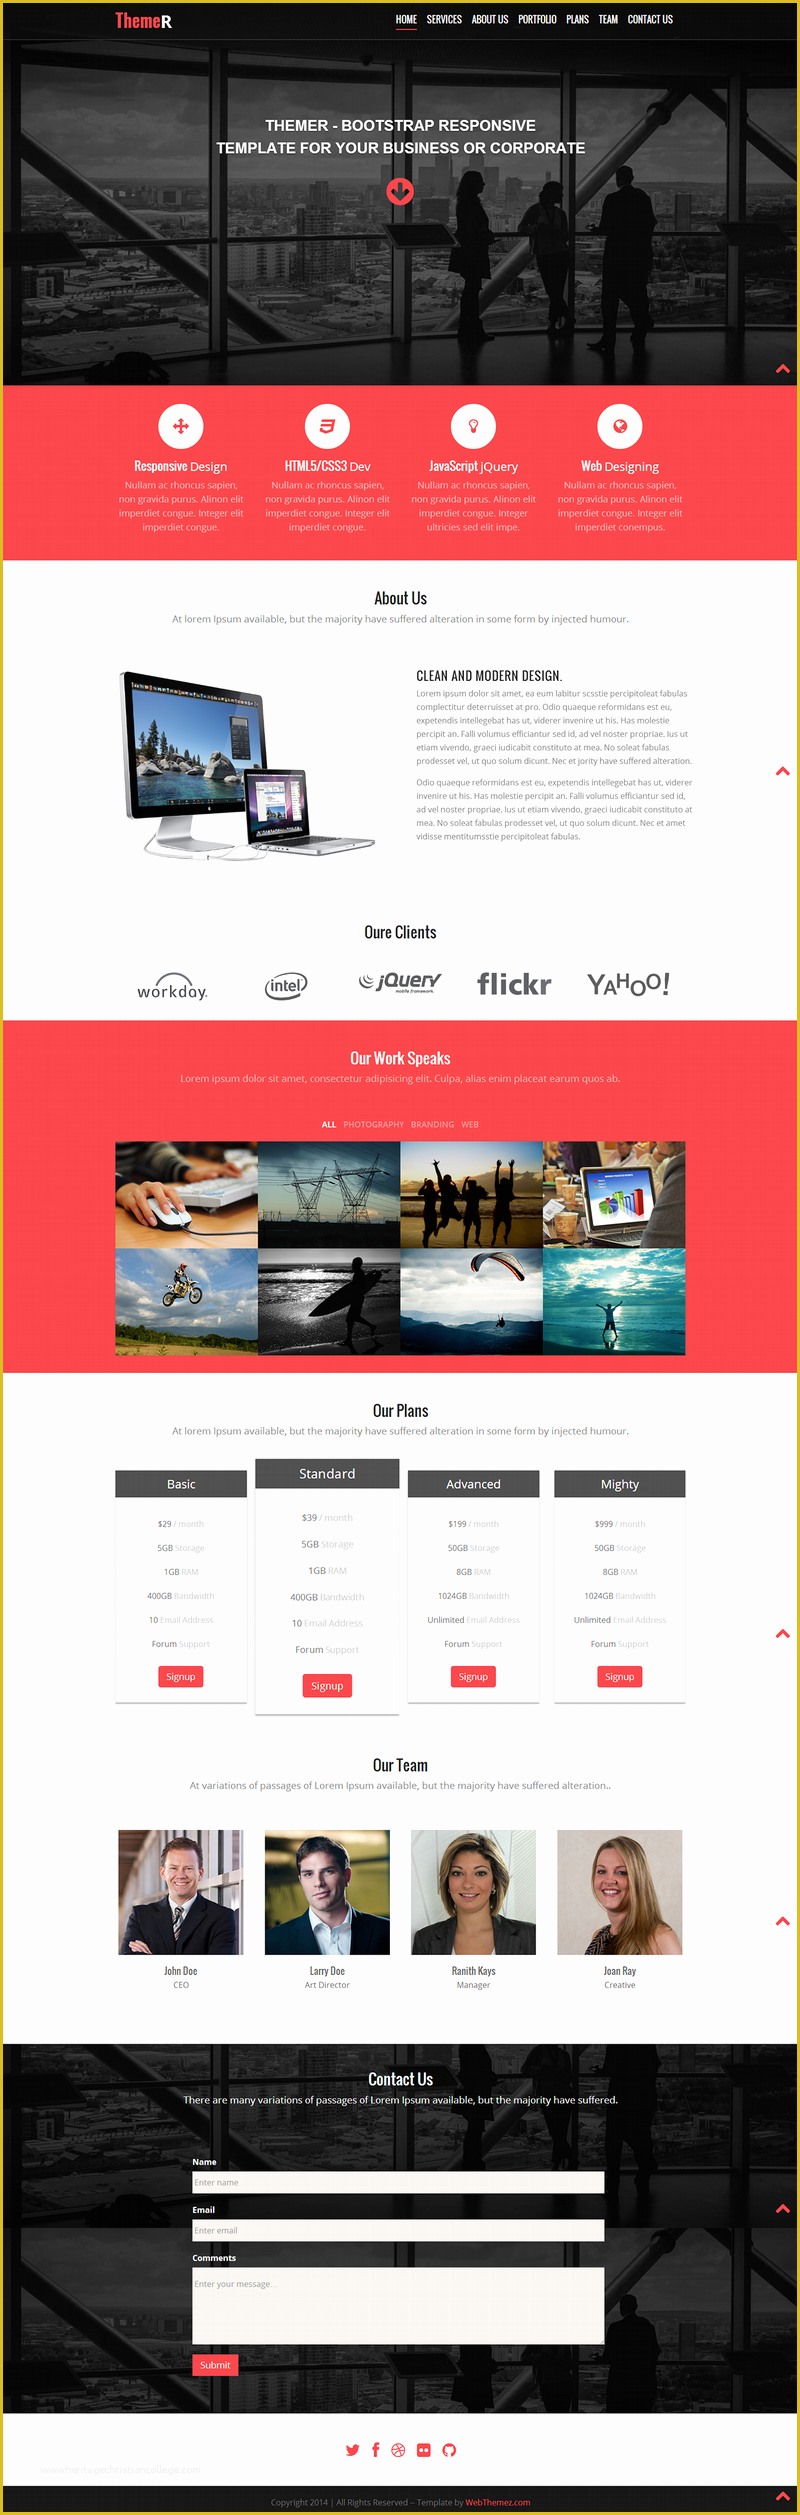 Free Web Templates Bootstrap Of 10 Best Free Website HTML5 Templates – August 2014